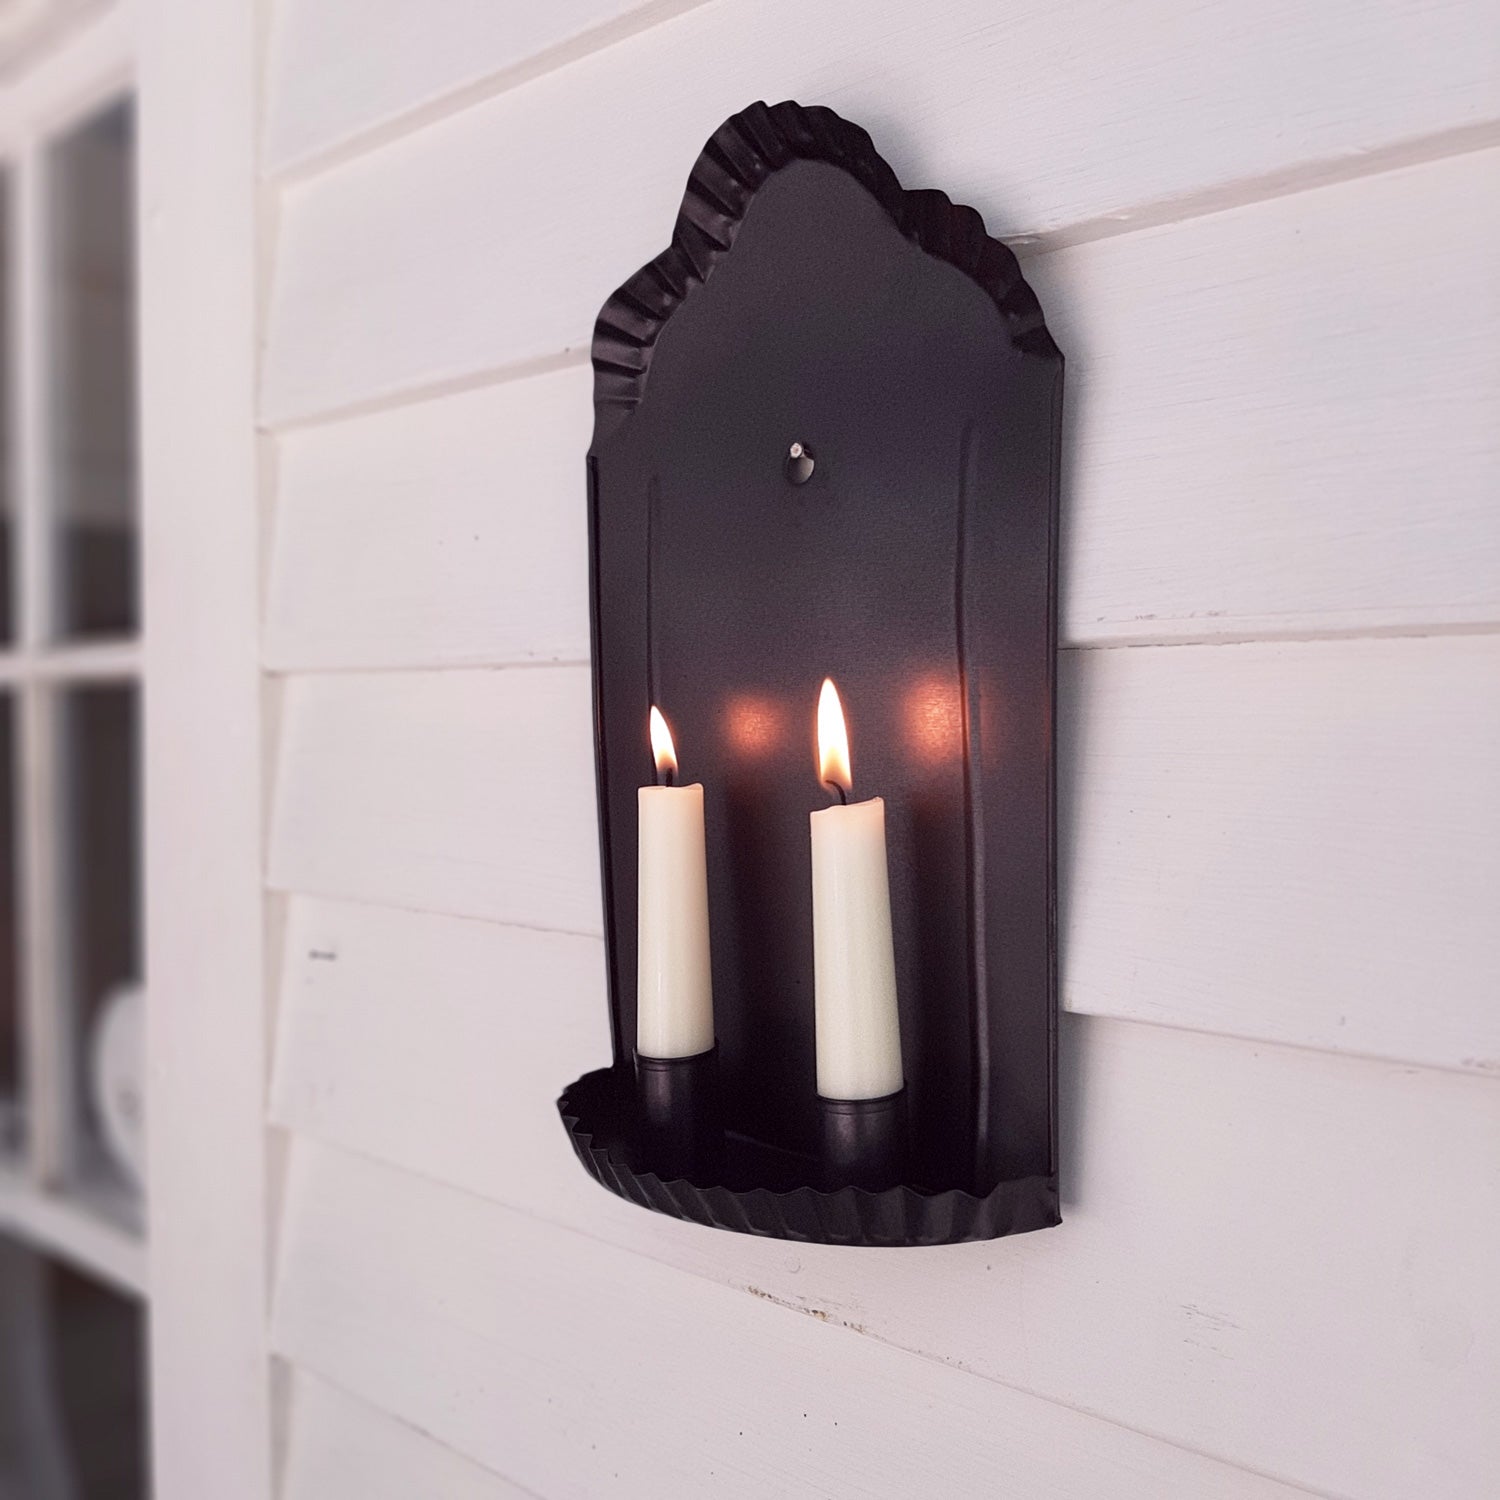 Our Carriage House Candle Wall Sconce is a black metal taper holder featuring decorative fluted edges around the rim of the pan and the top of the piece.. This black metal wall sconce holds two taper candles. Its simple design works well with rustic farmhouse or  coastal cottage decor.  7”L x 2.25”W x 12”H